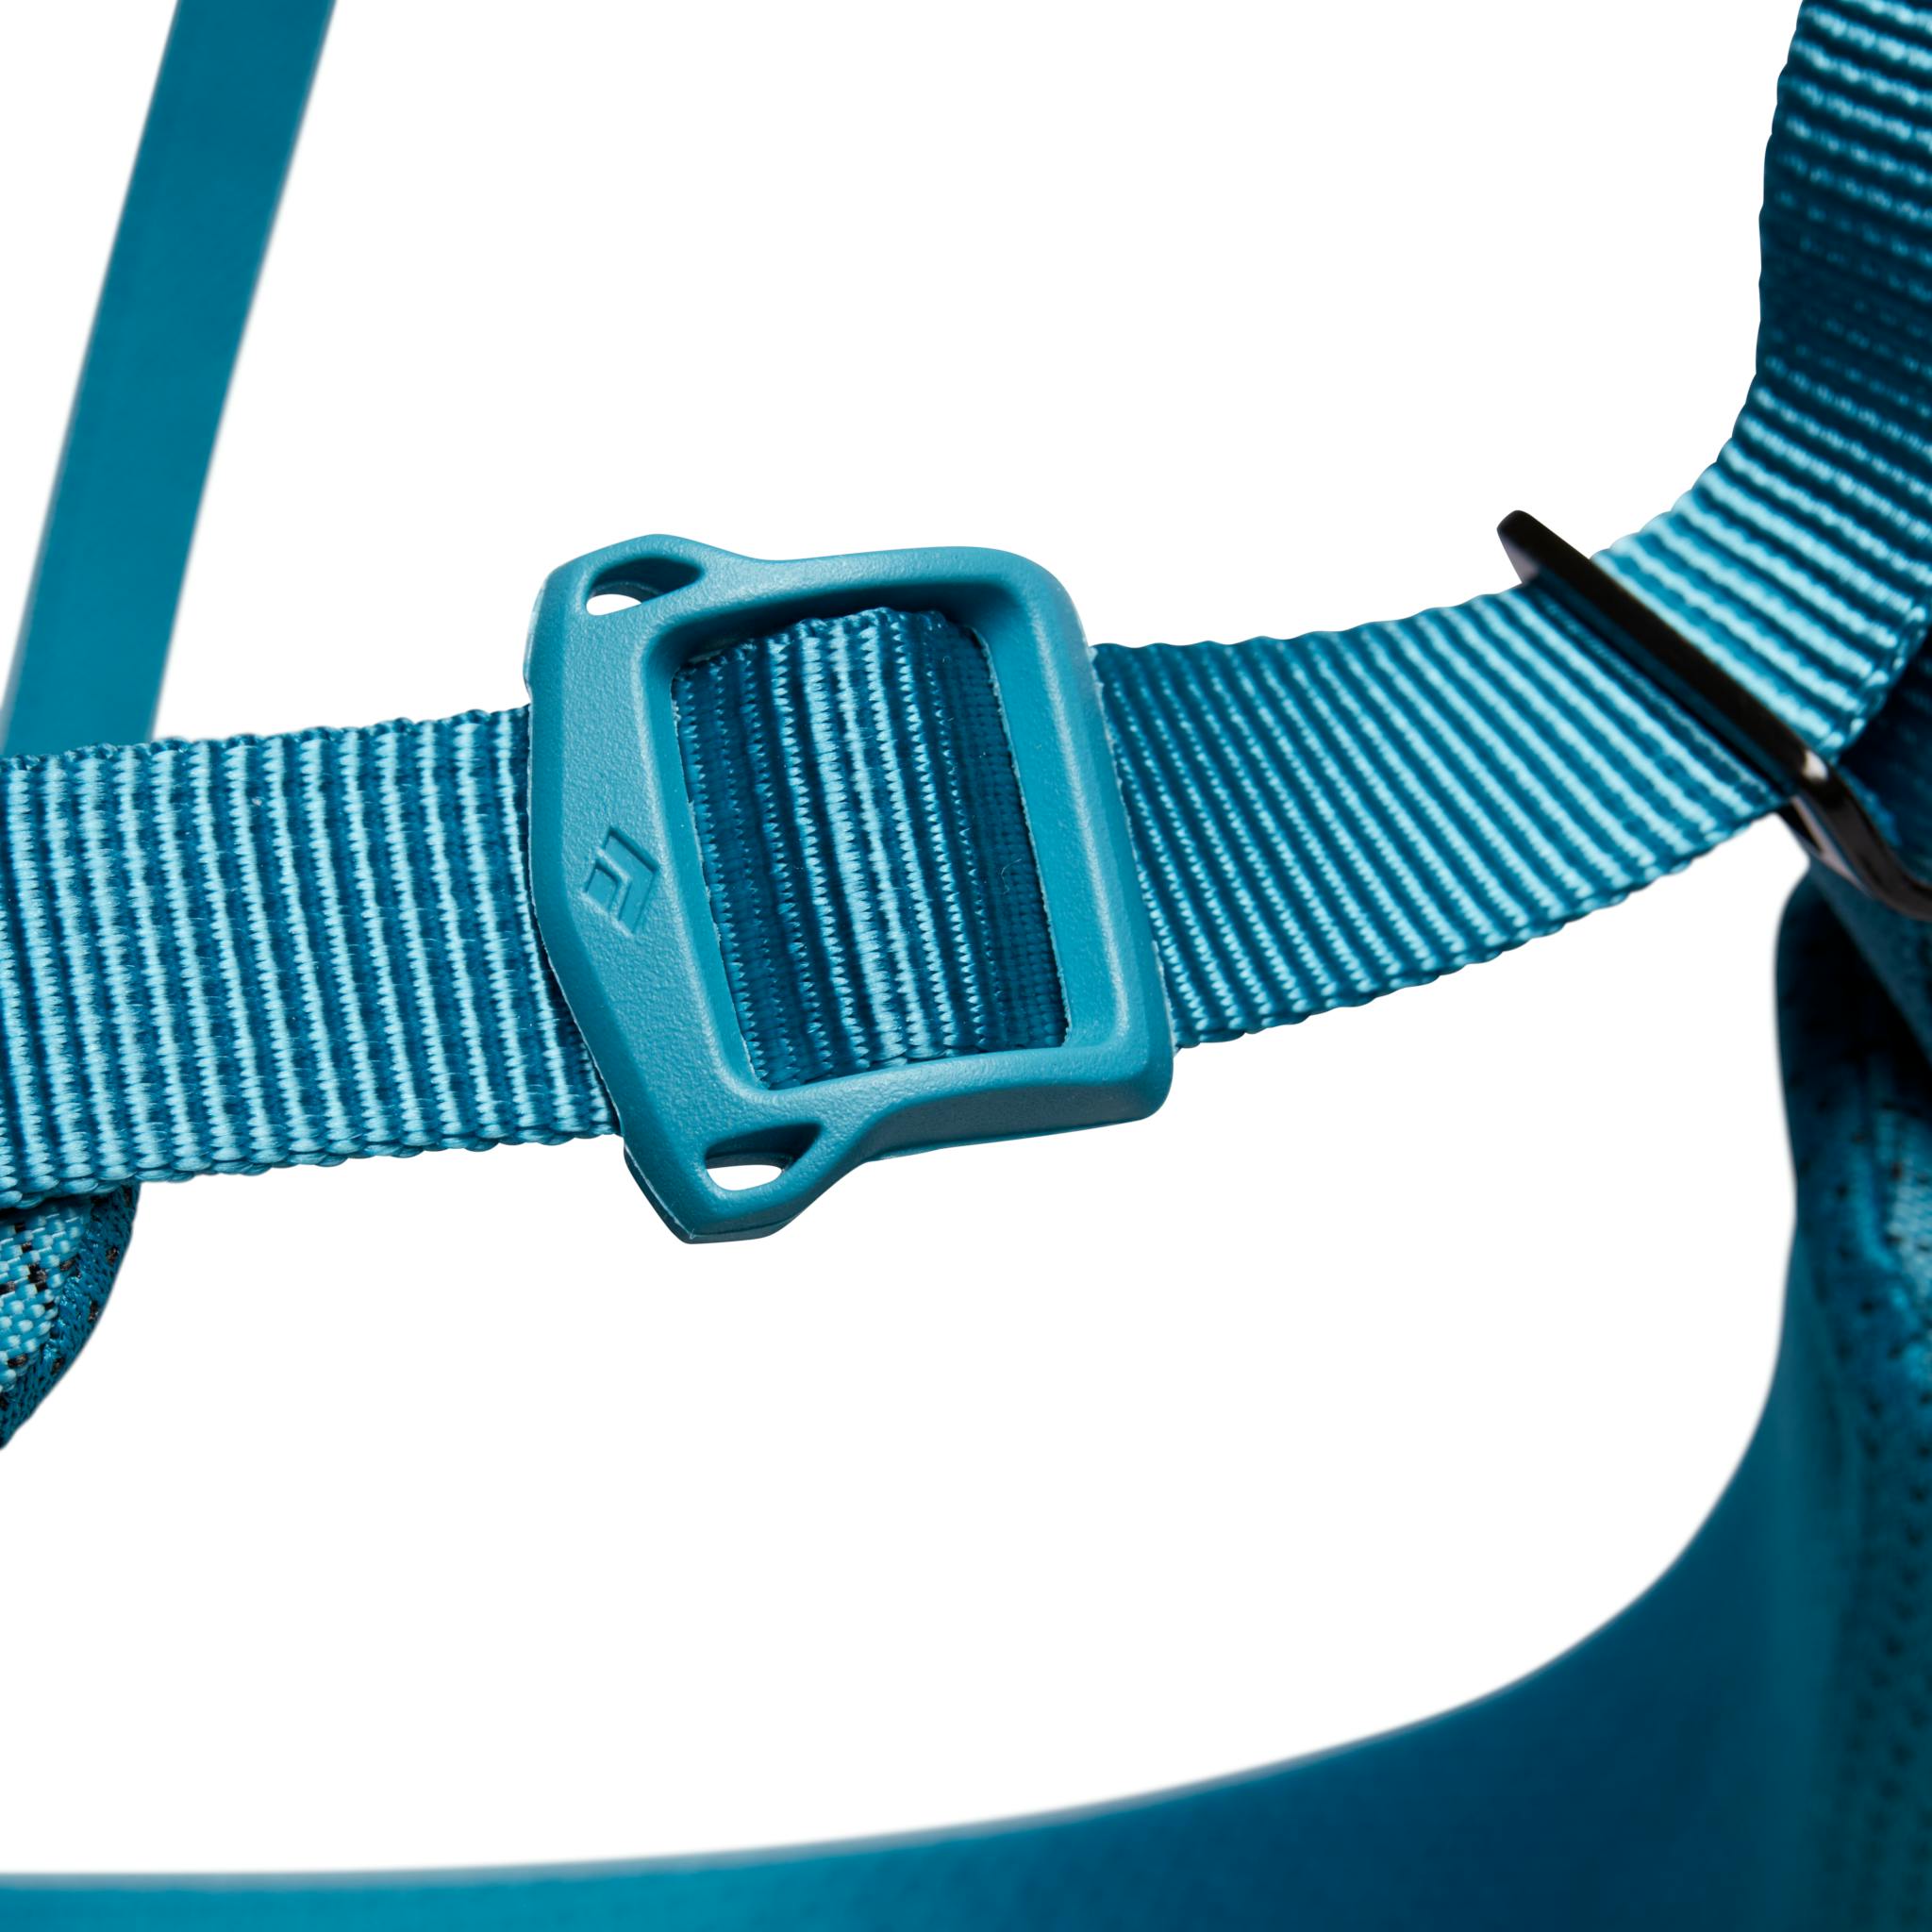 A close up image of the TrakFit leg loops on a blue Women's Momentum Harness